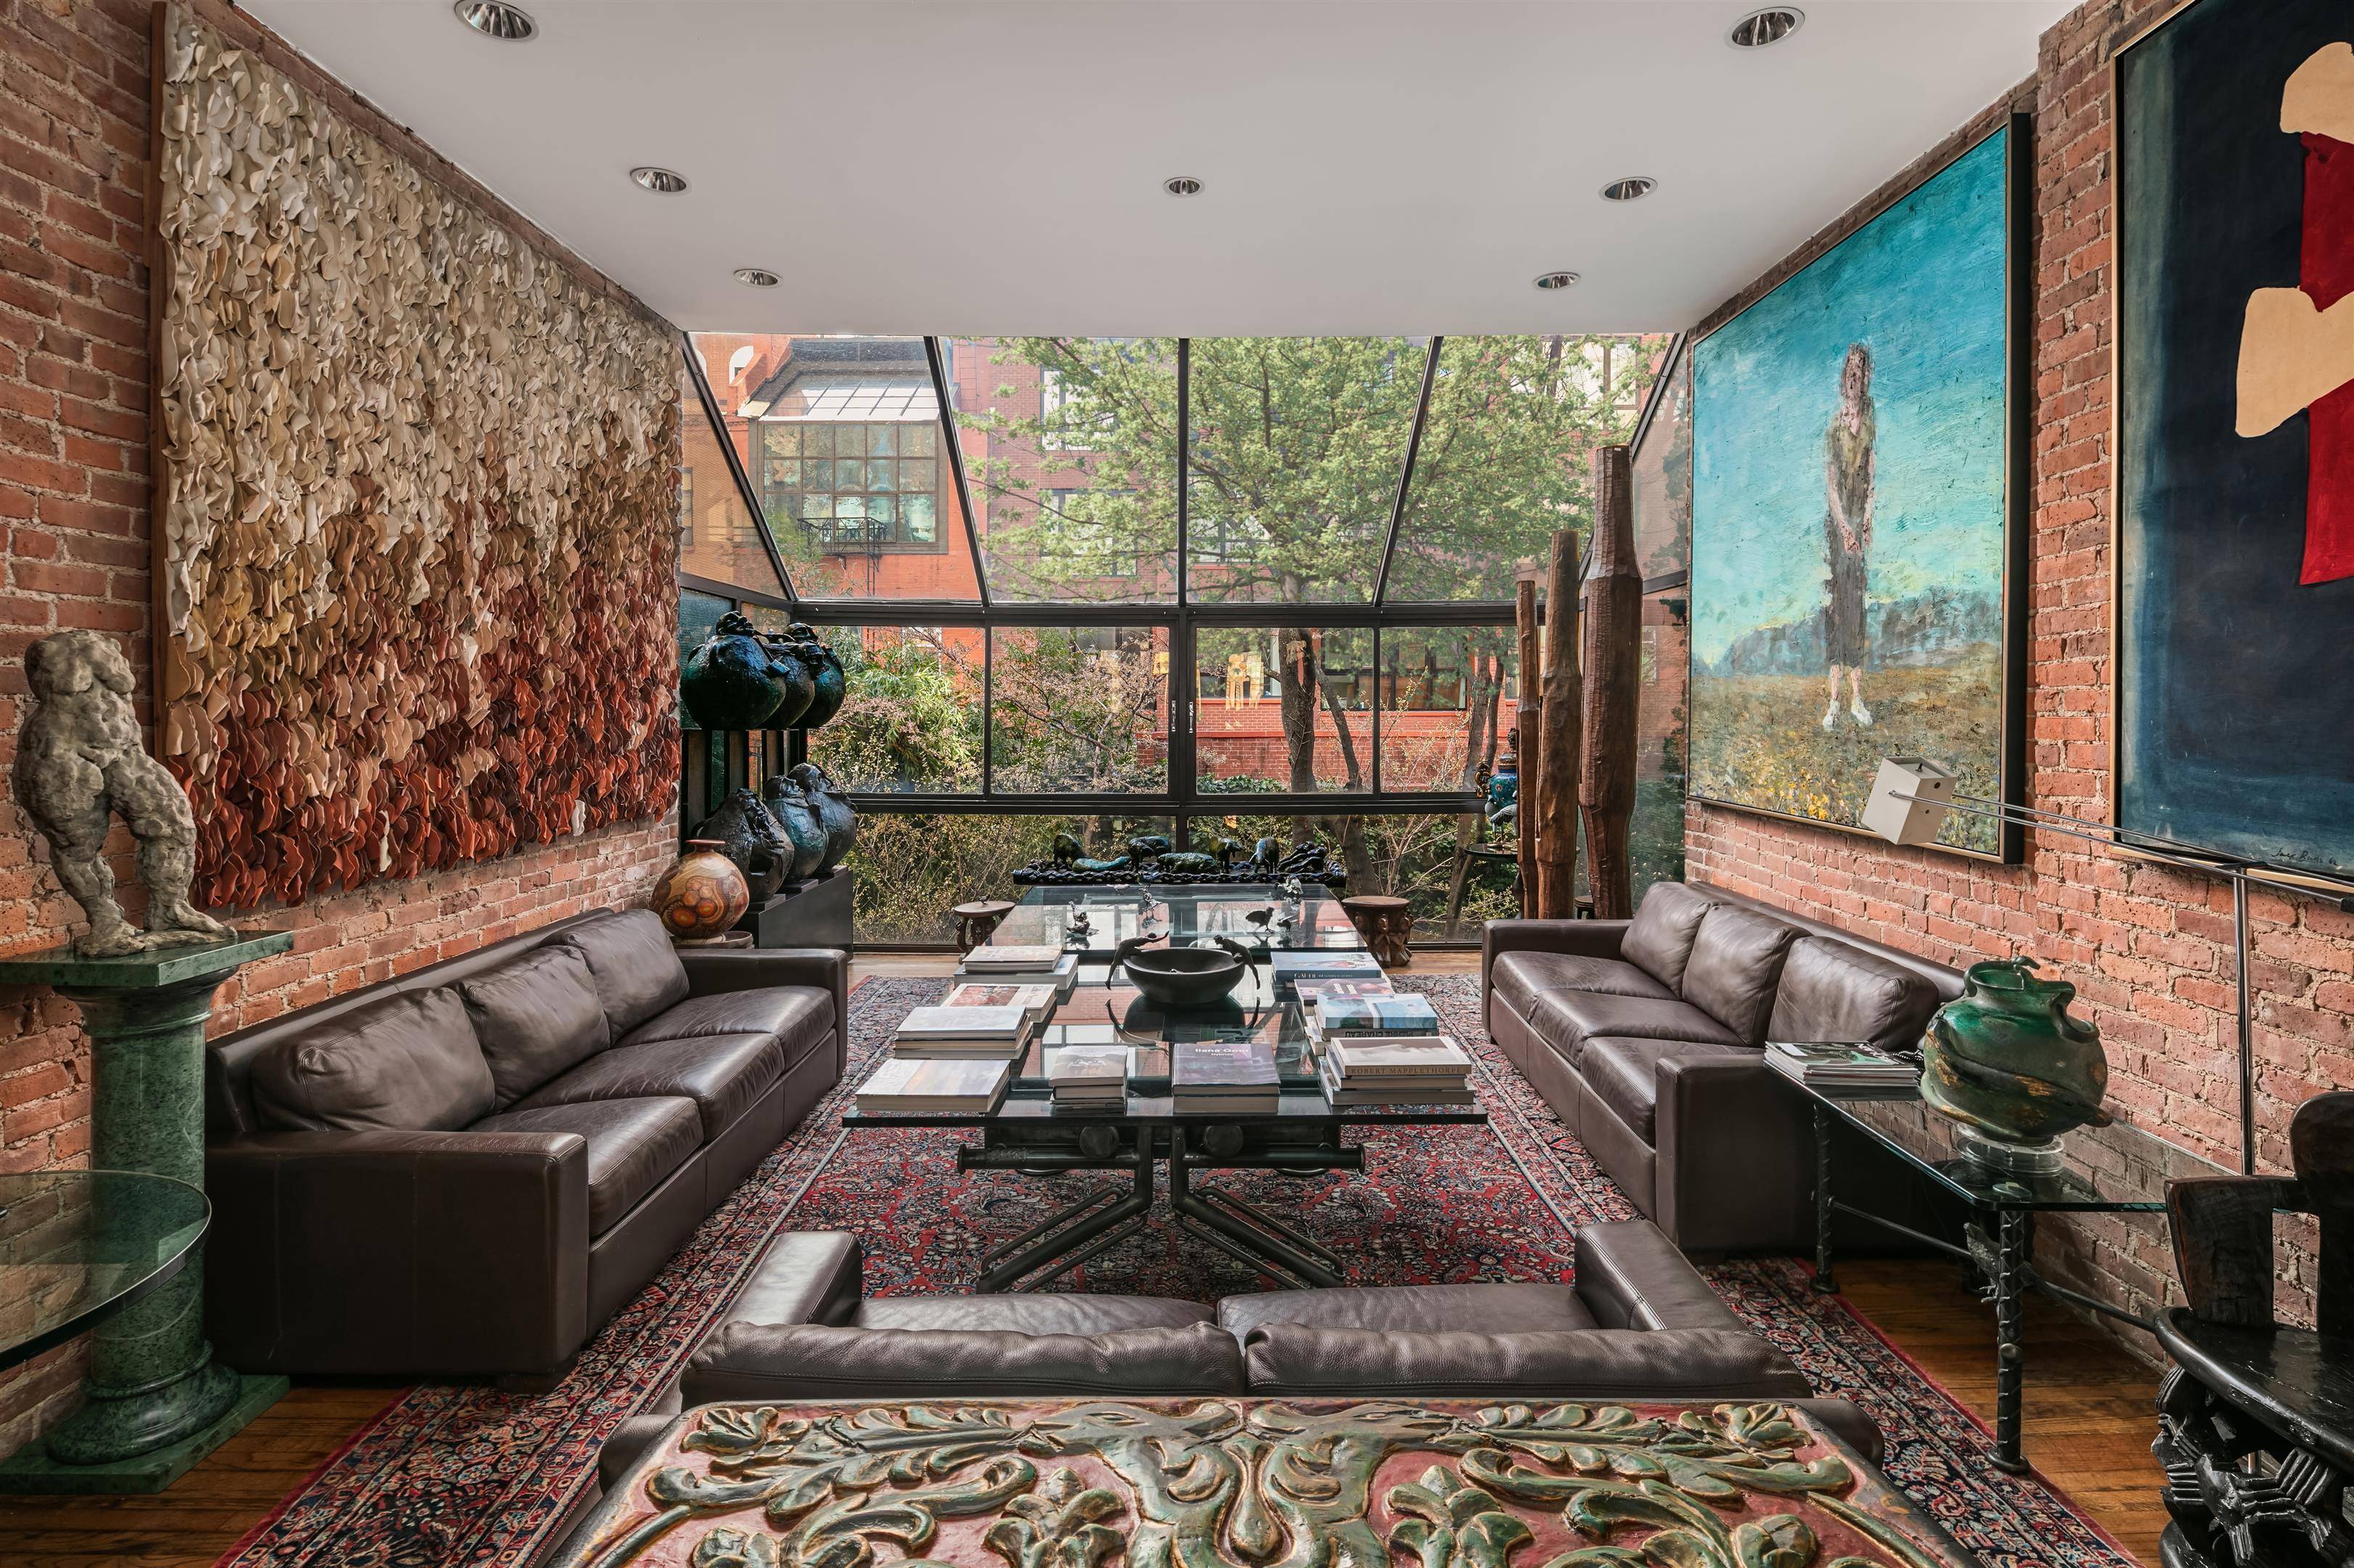 178 East 75th Street is an iconic home of distinction thoughtfully renovated and curated by renowned international artist, Ilana Goor and her husband.